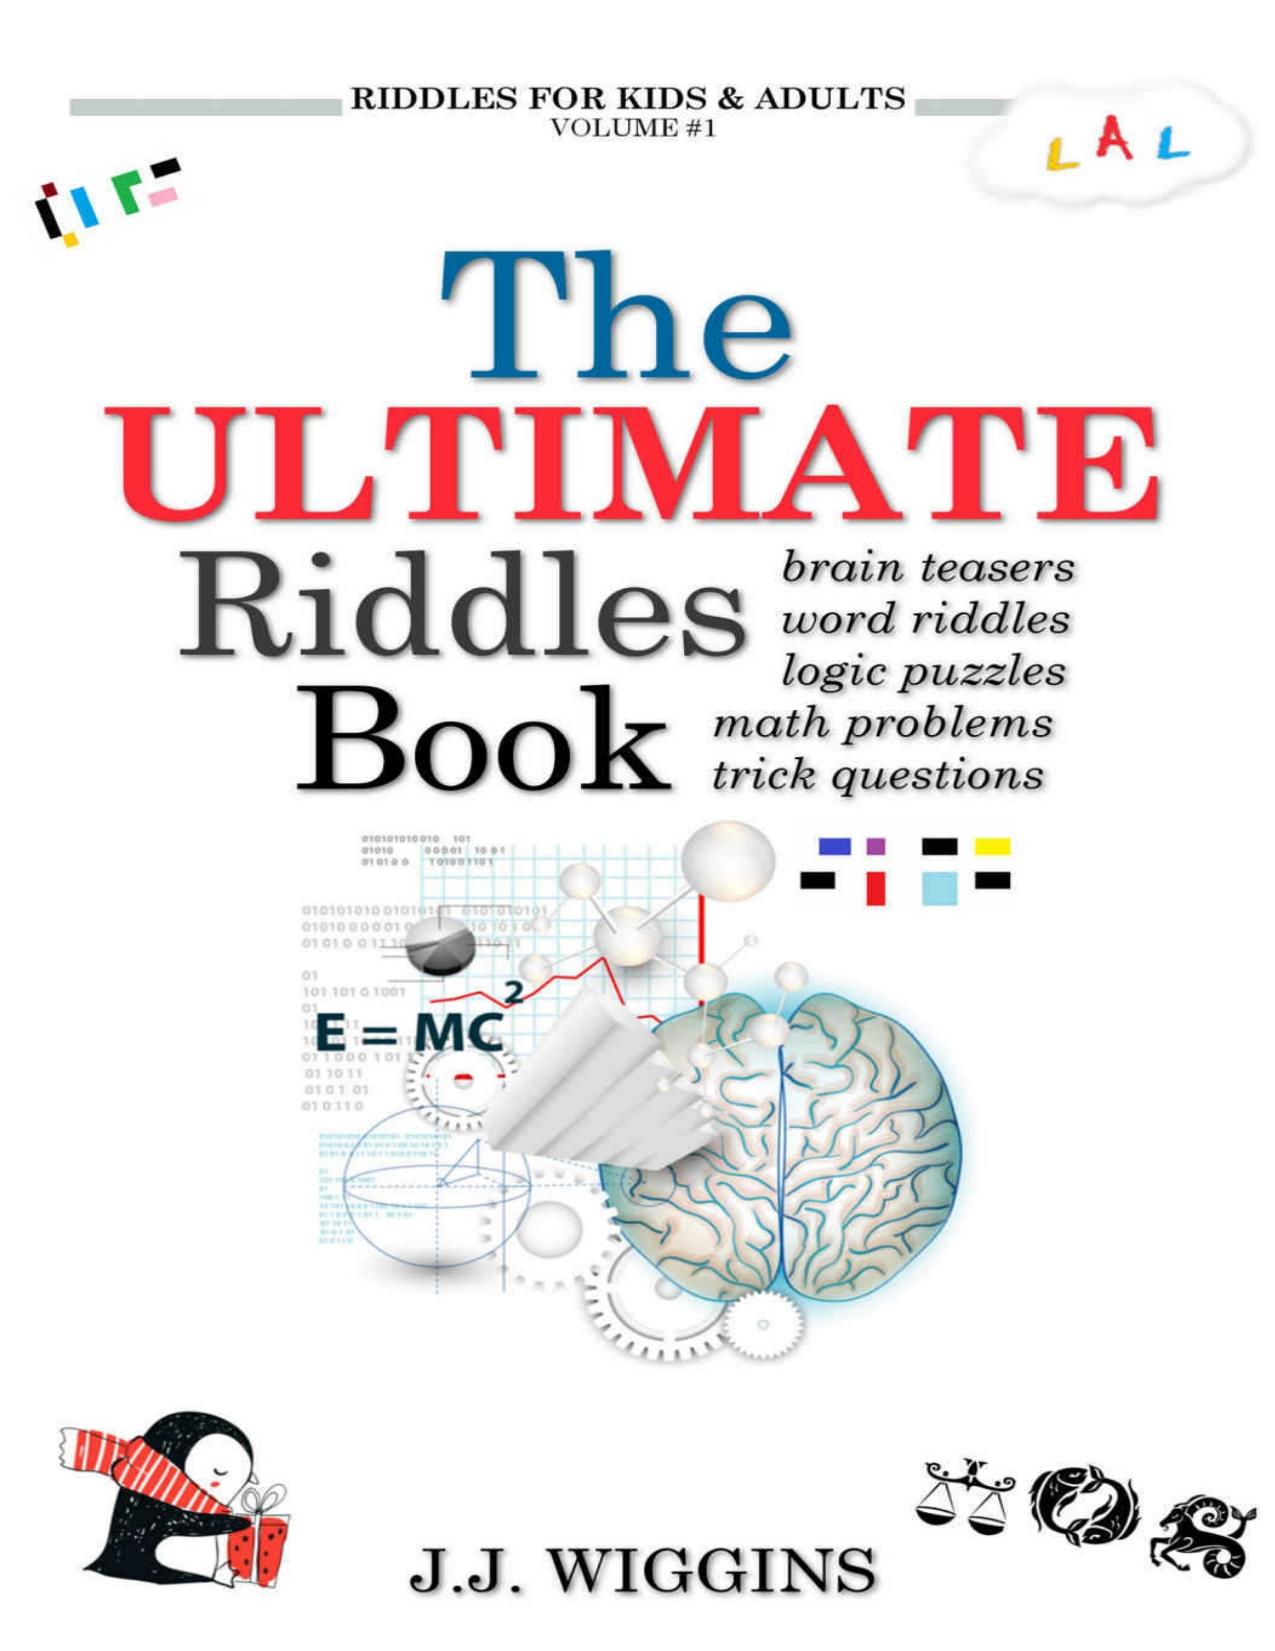 The Ultimate Riddles Book: Word Riddles, Brain Teasers, Logic Puzzles, Math Problems, Trick Questions, and More! (Riddles for Kids and Adults Book 1) by Wiggins J. J